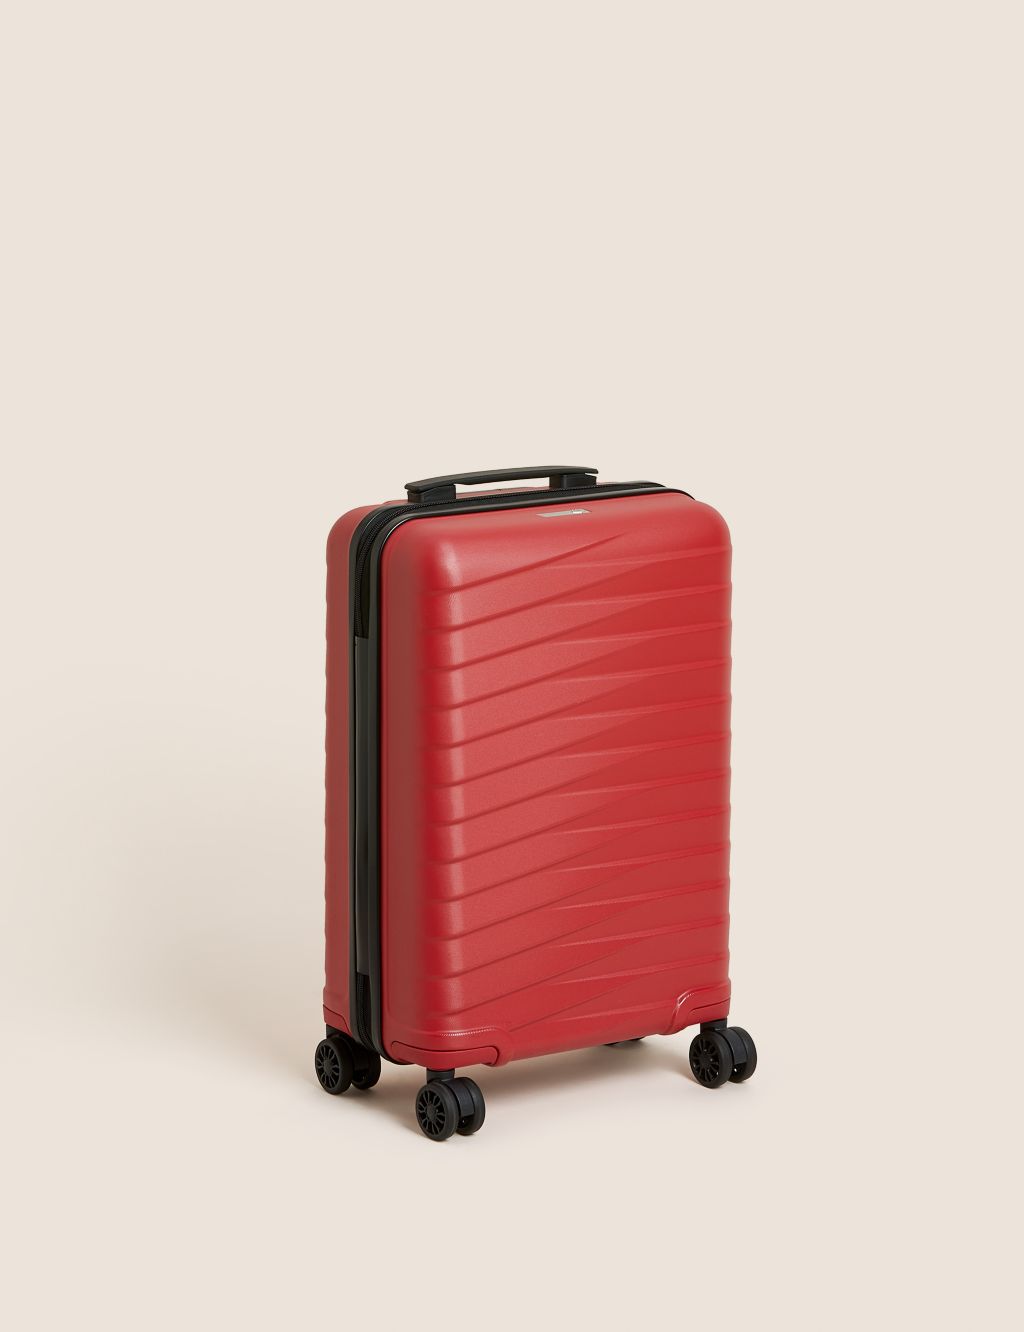 The red suitcase, choosing a red suitcase can be an exciting and practical decision for travelers looking to add a pop of color and